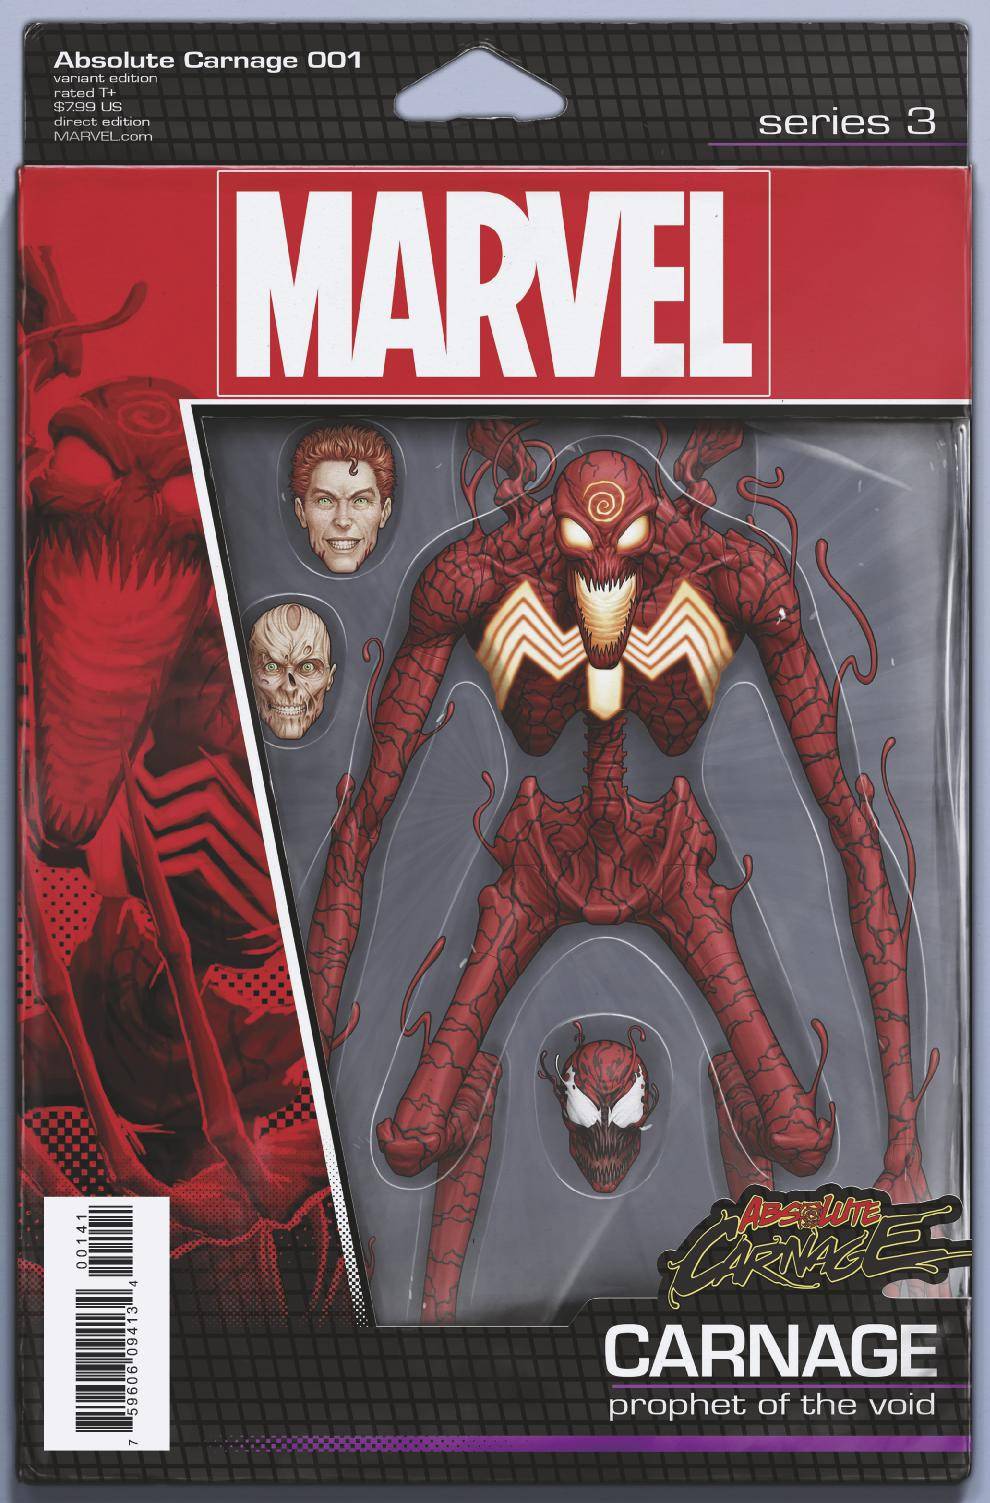 ABSOLUTE CARNAGE #1 (OF 4) CHRISTOPHER ACTION FIGURE VARIANT 08/07/19